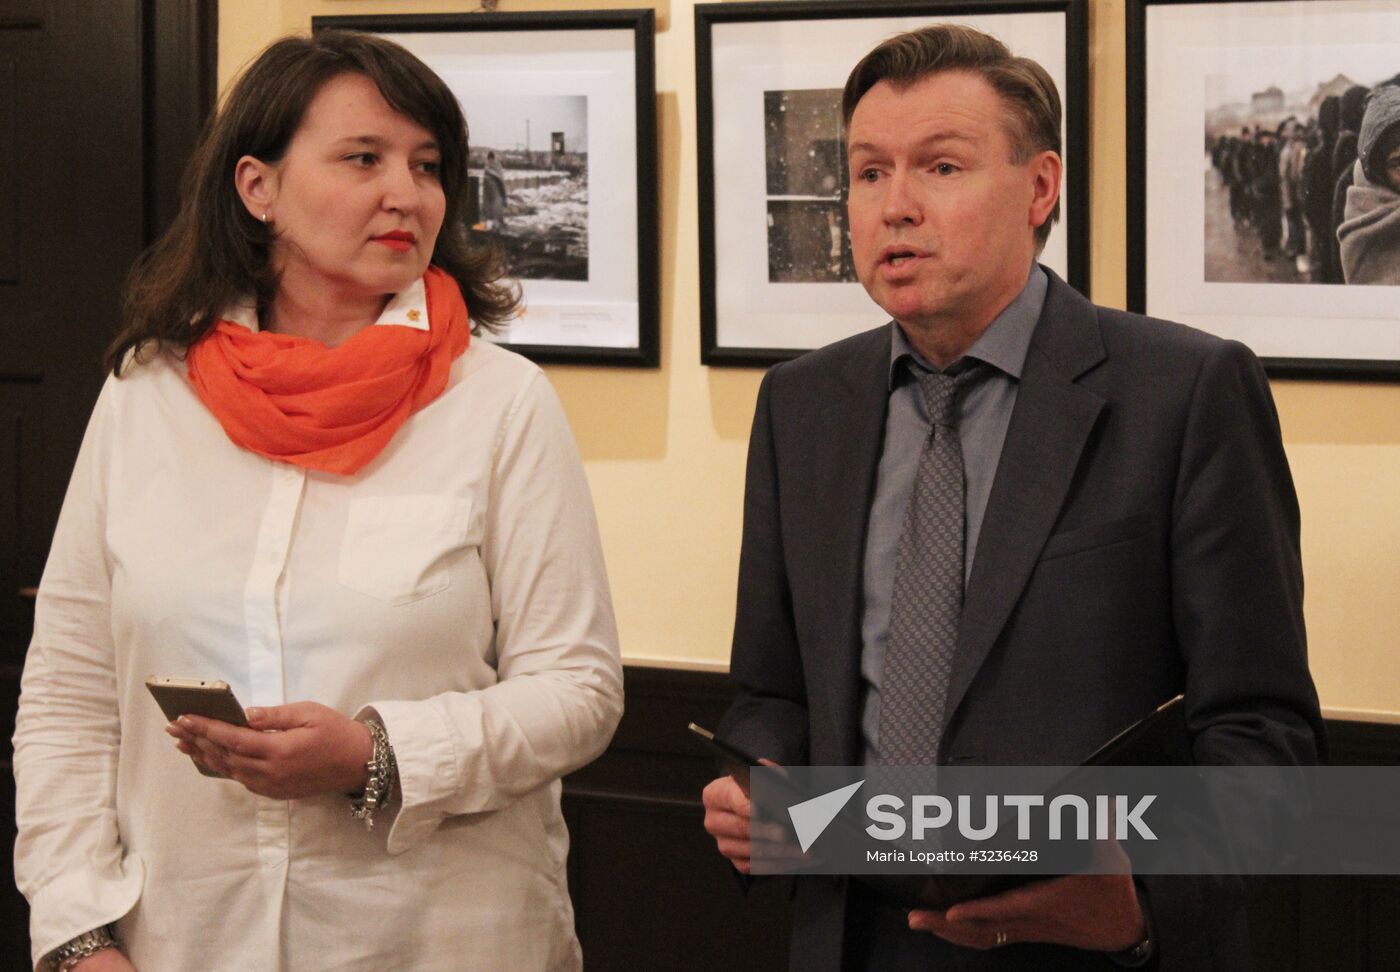 Opening of exhibition of works by winners of Andrei Stenin International Press Photo Contest in Budapest